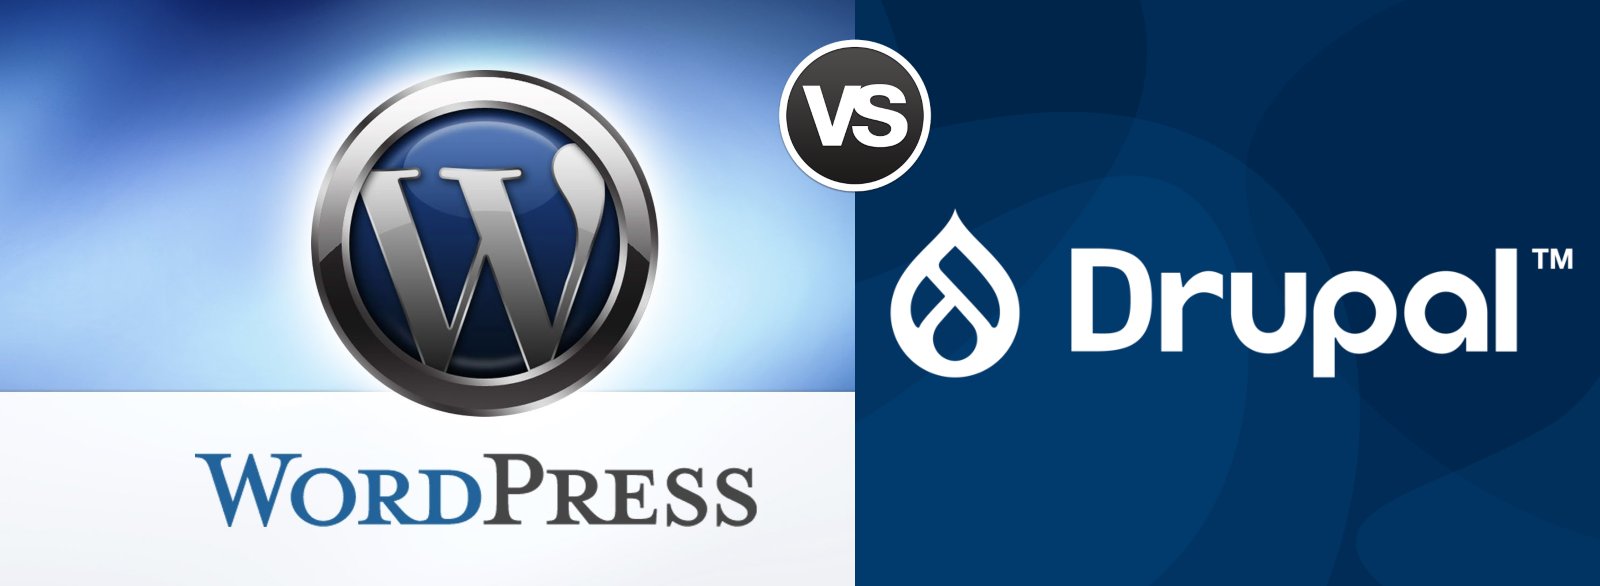 Which One is better WordPress Or Drupal?